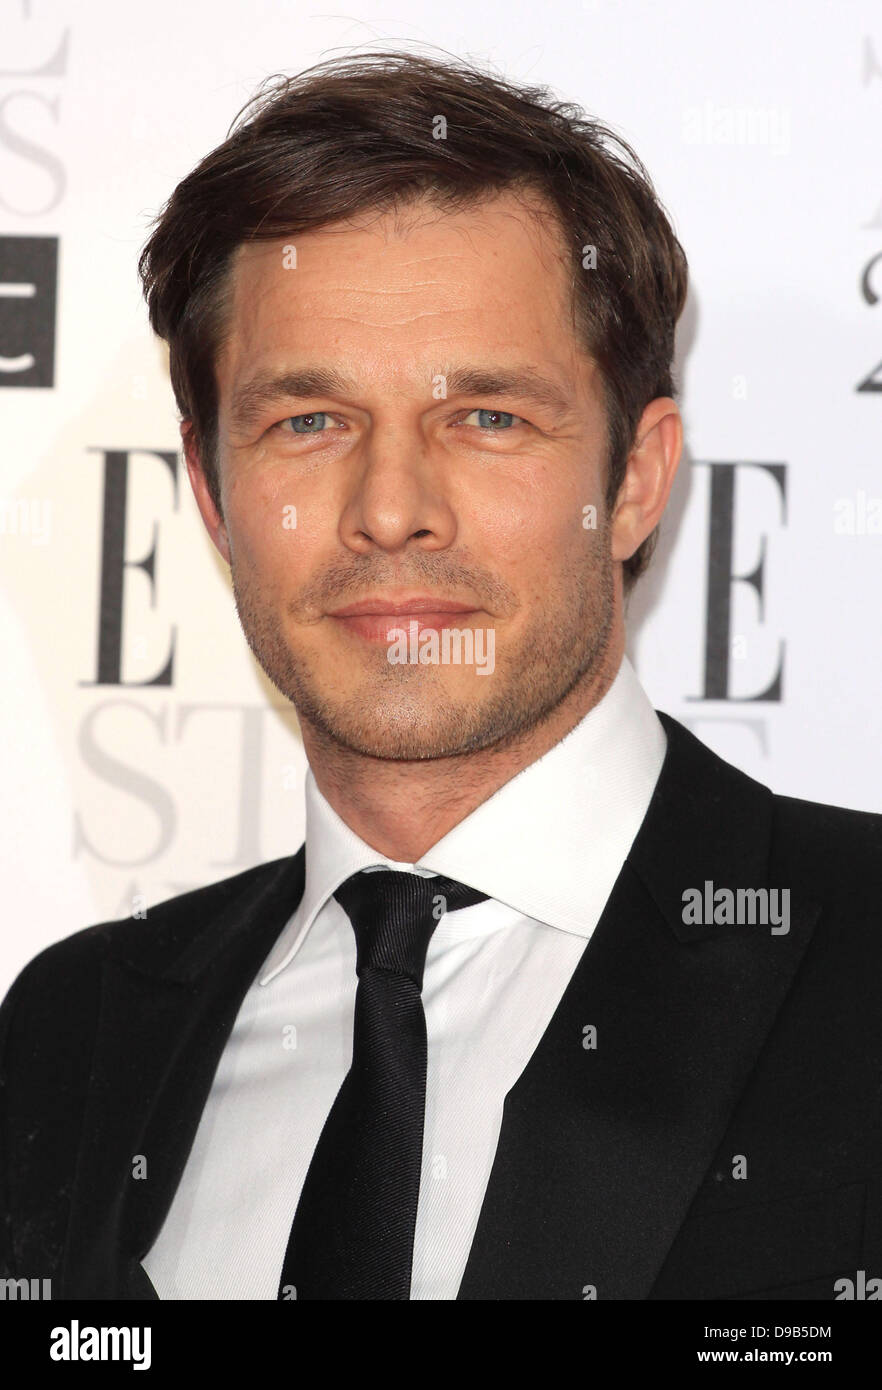 Paul Sculfor The Elle Style Awards 2012 held at The Savoy - Arrivals London, England - 13.02.12 Stock Photo